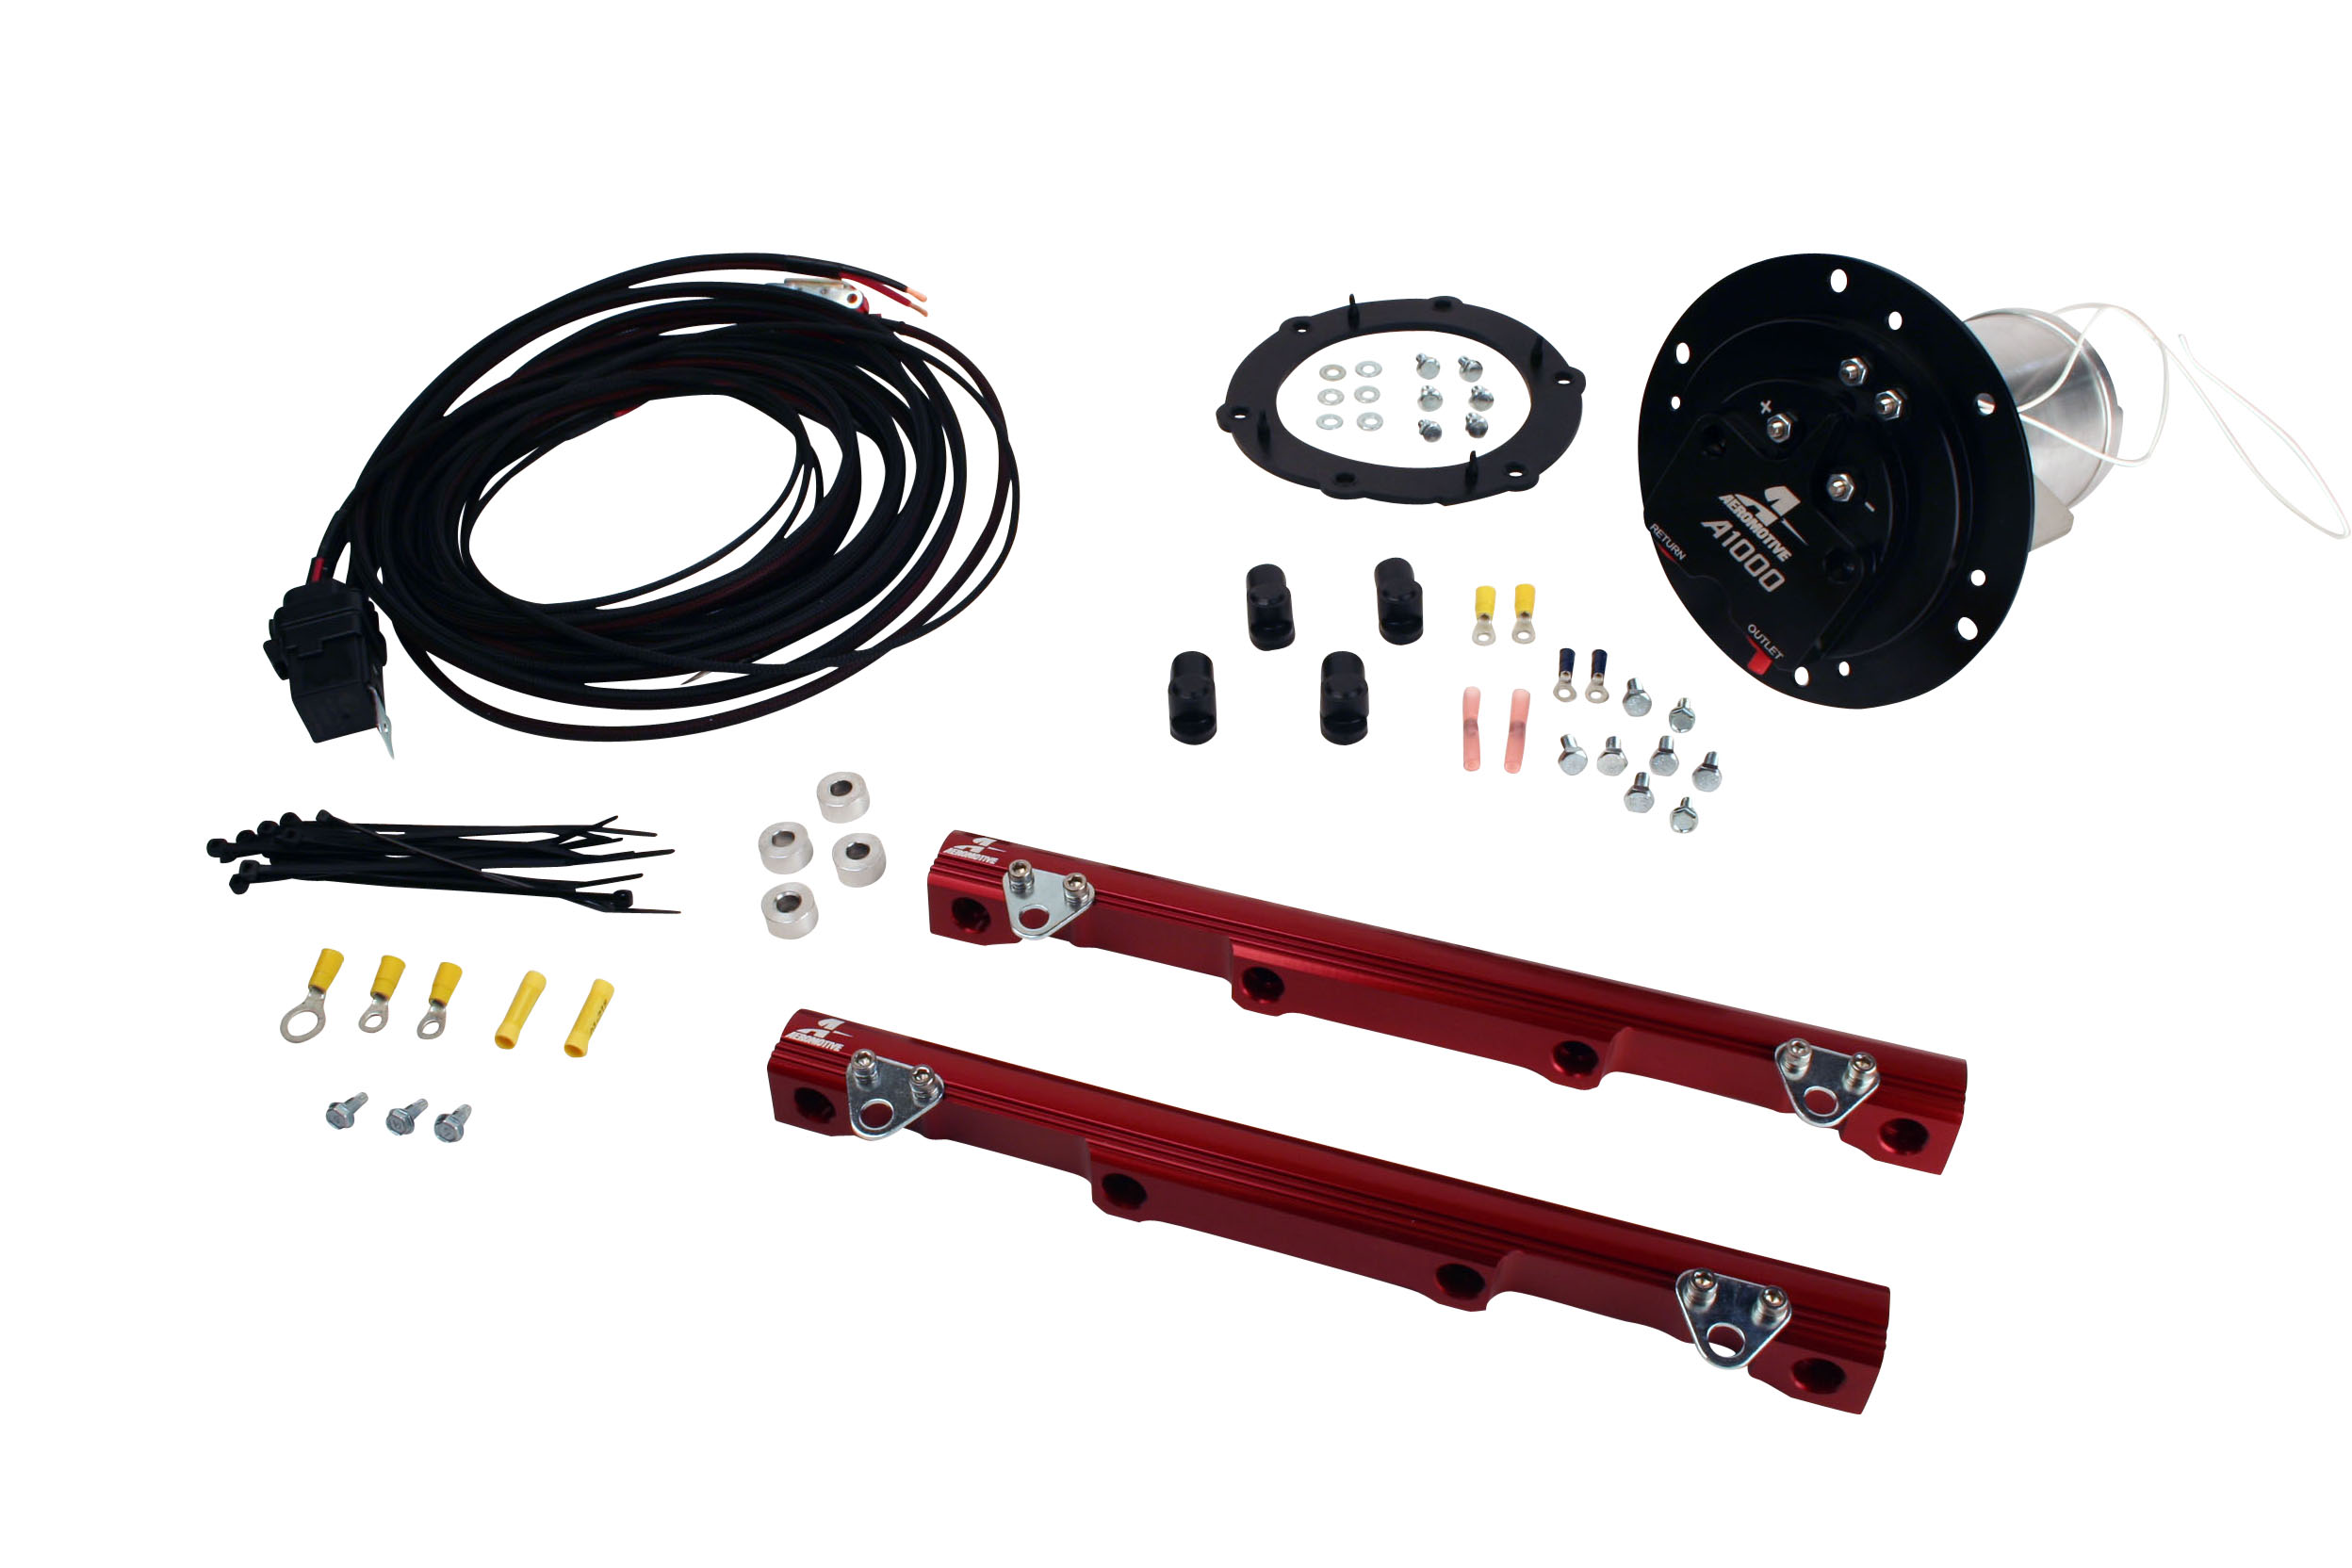 2003-2004 Ford Mustang Cobra Aeromotive Stealth A1000 Race Fuel System